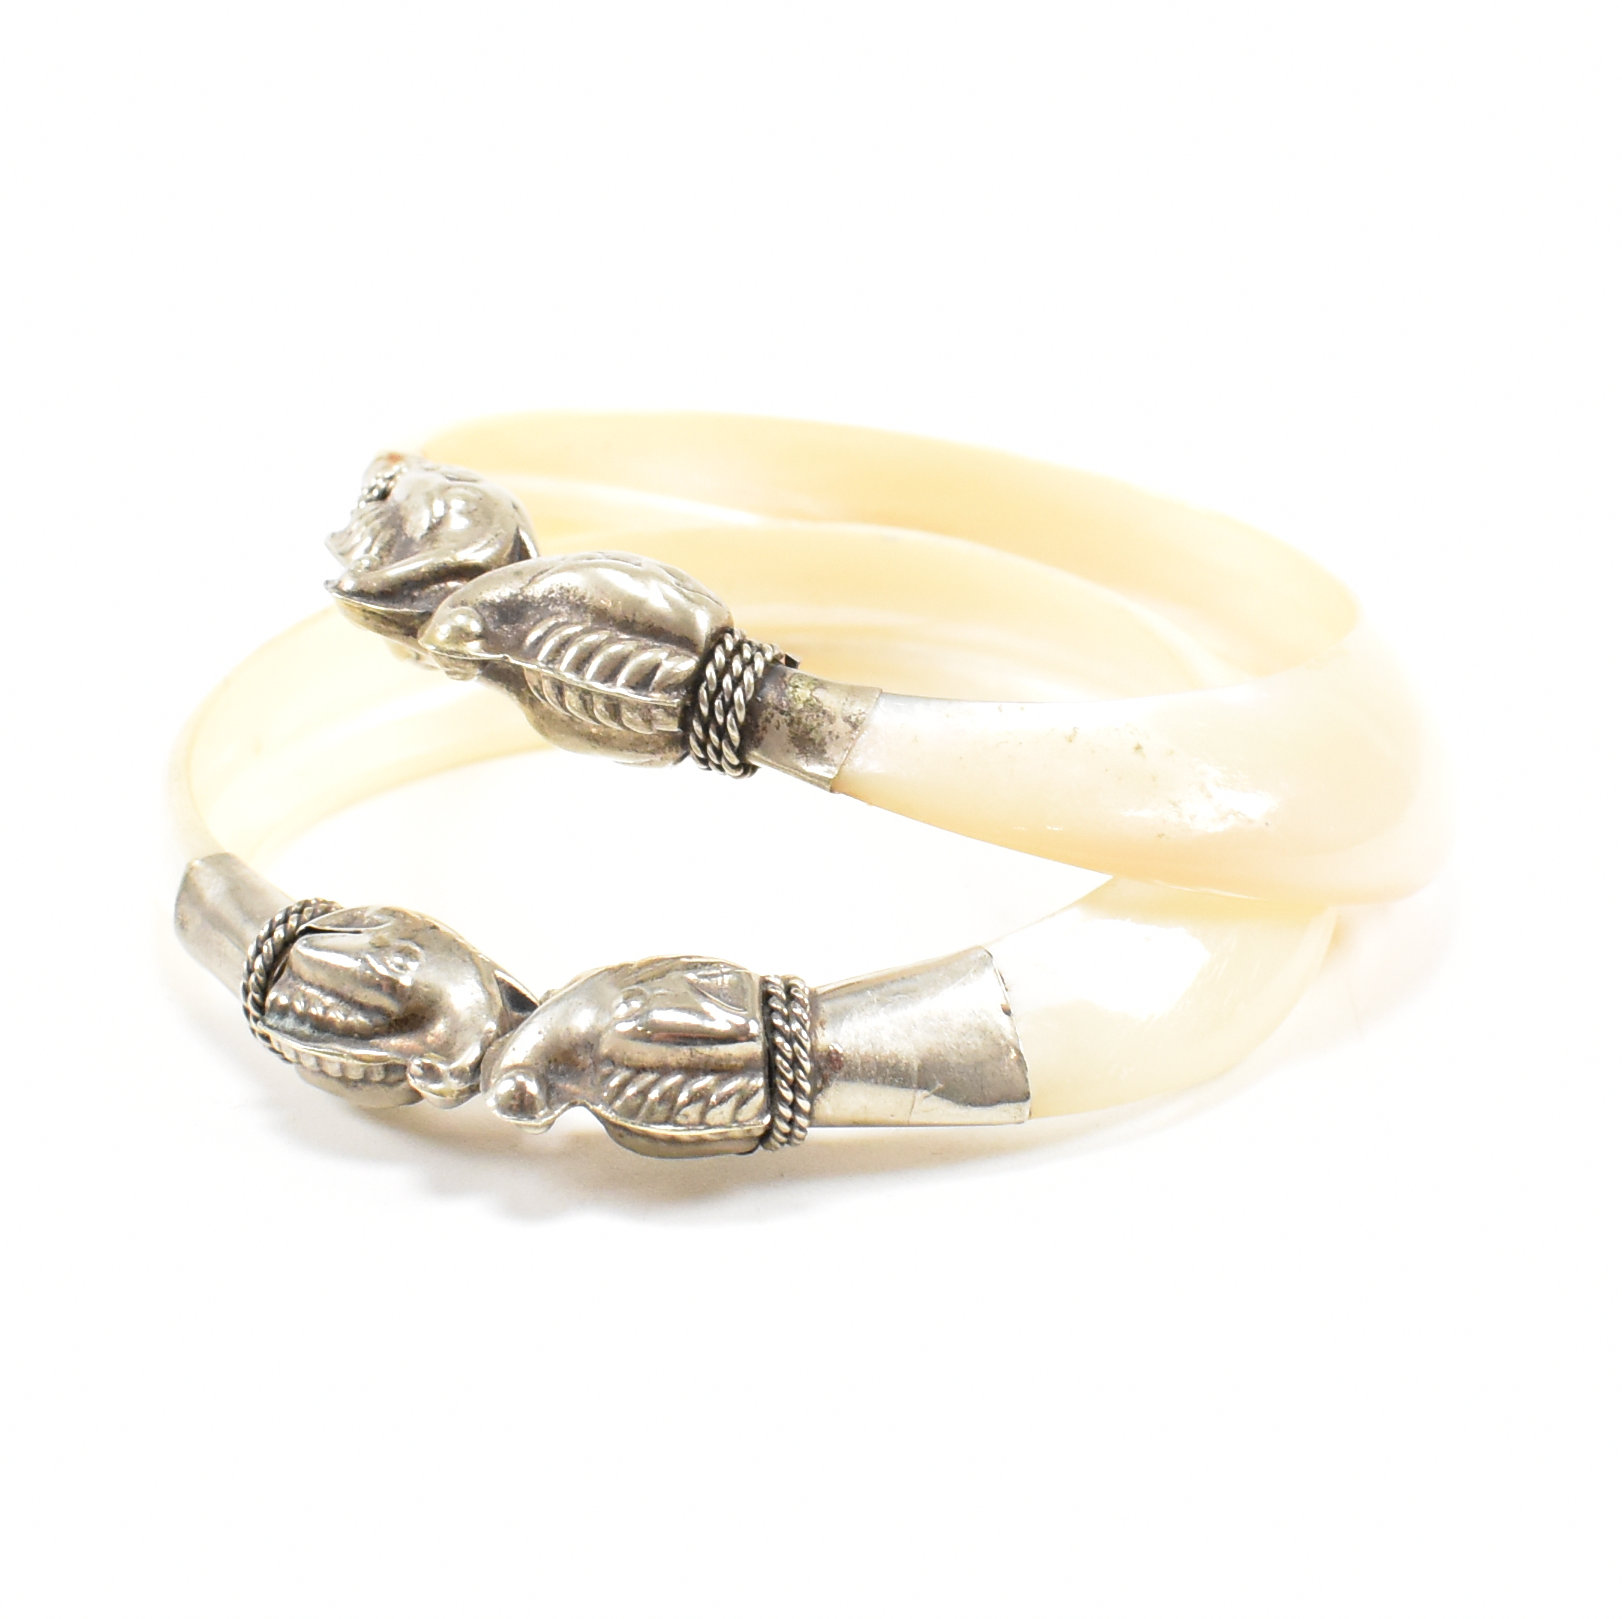 PAIR OF MOTHER OF PEARL BANGLES